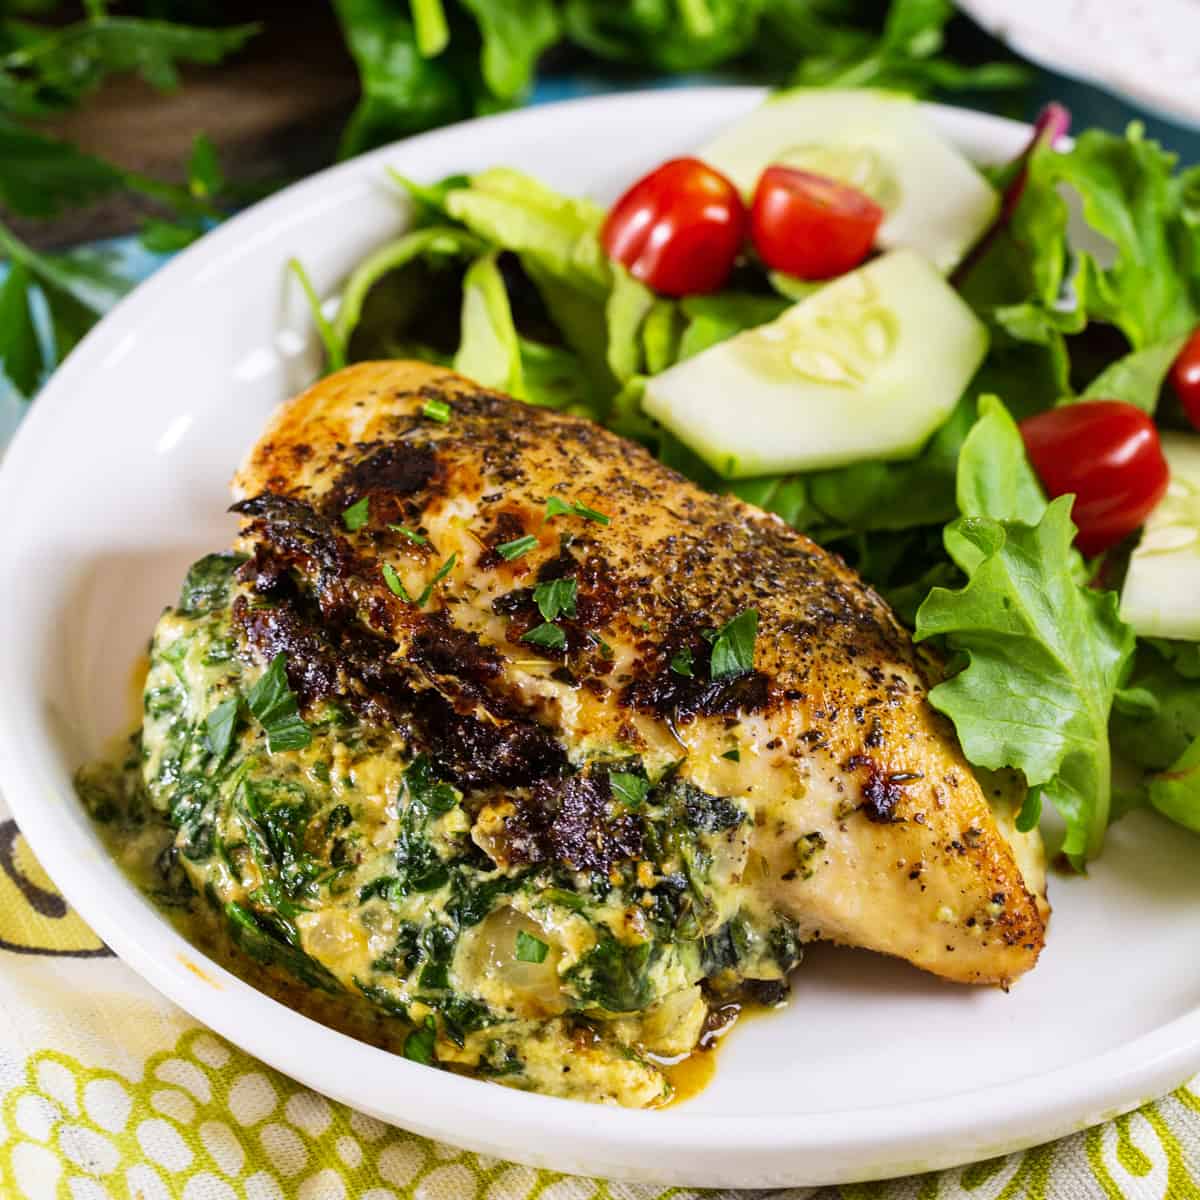 Spinach Ricotta Stuffed Chicken on plate with salad.